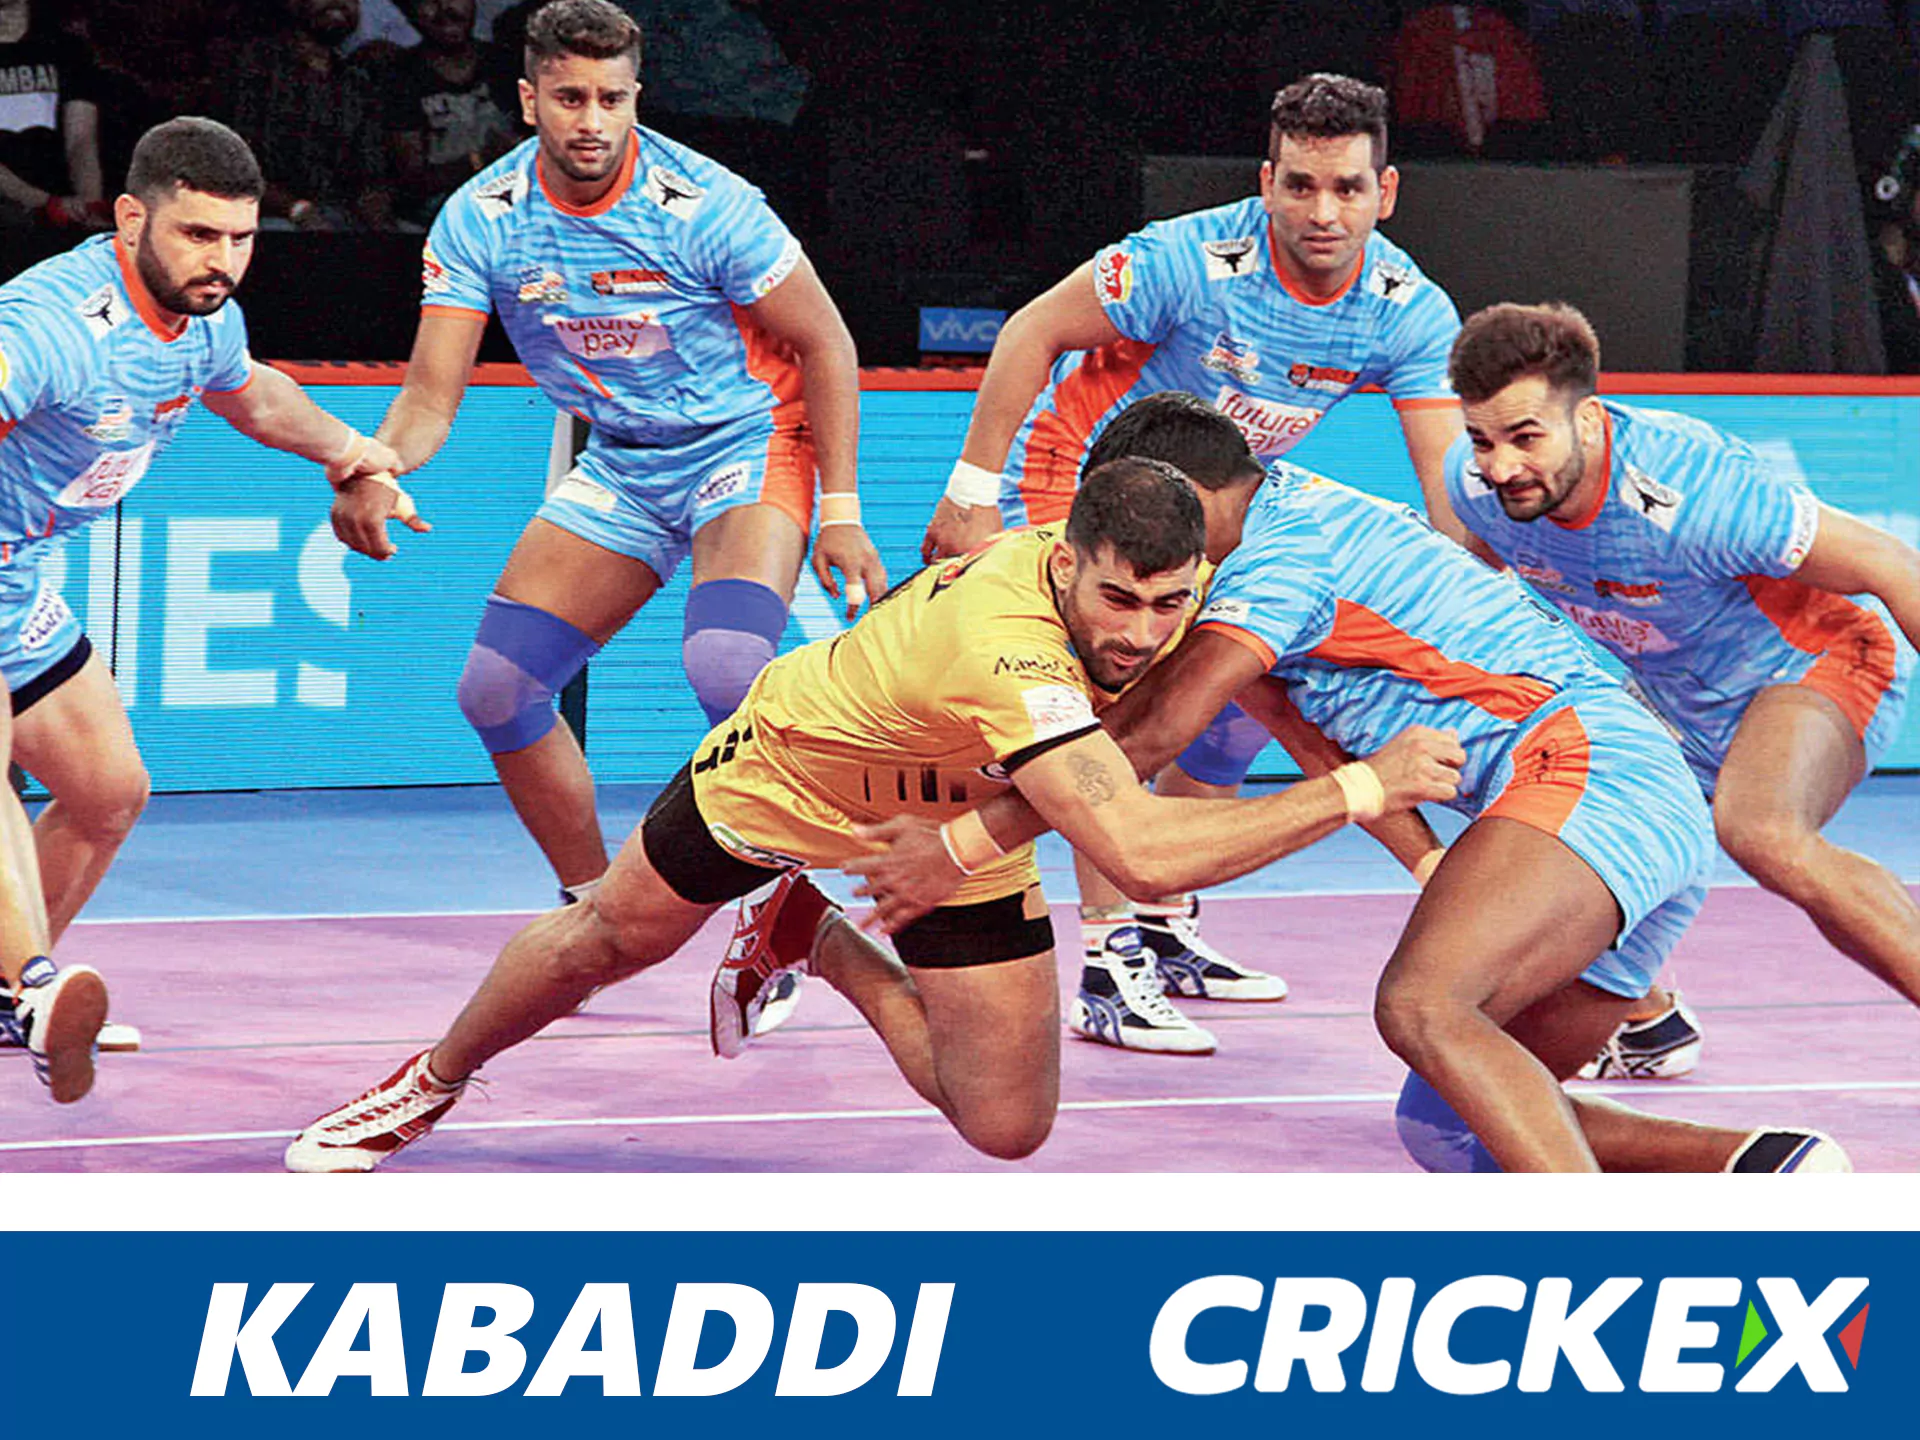 Watch and bet on kabaddi matches at Crickex.